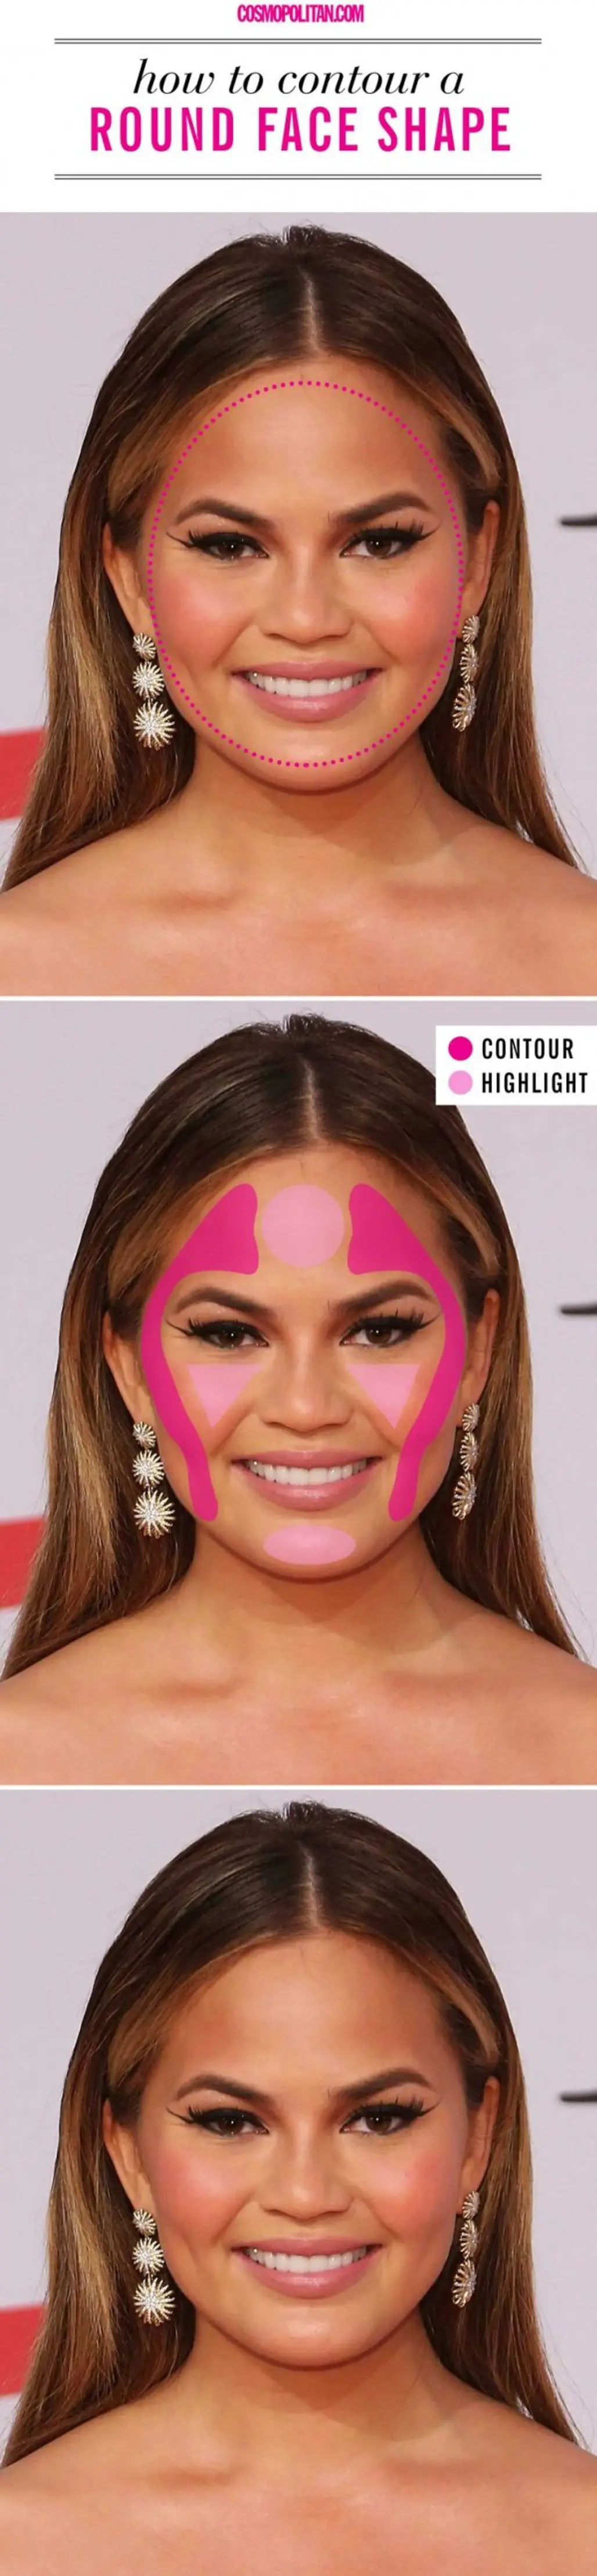 How to Contour if You Have a round Face Shape